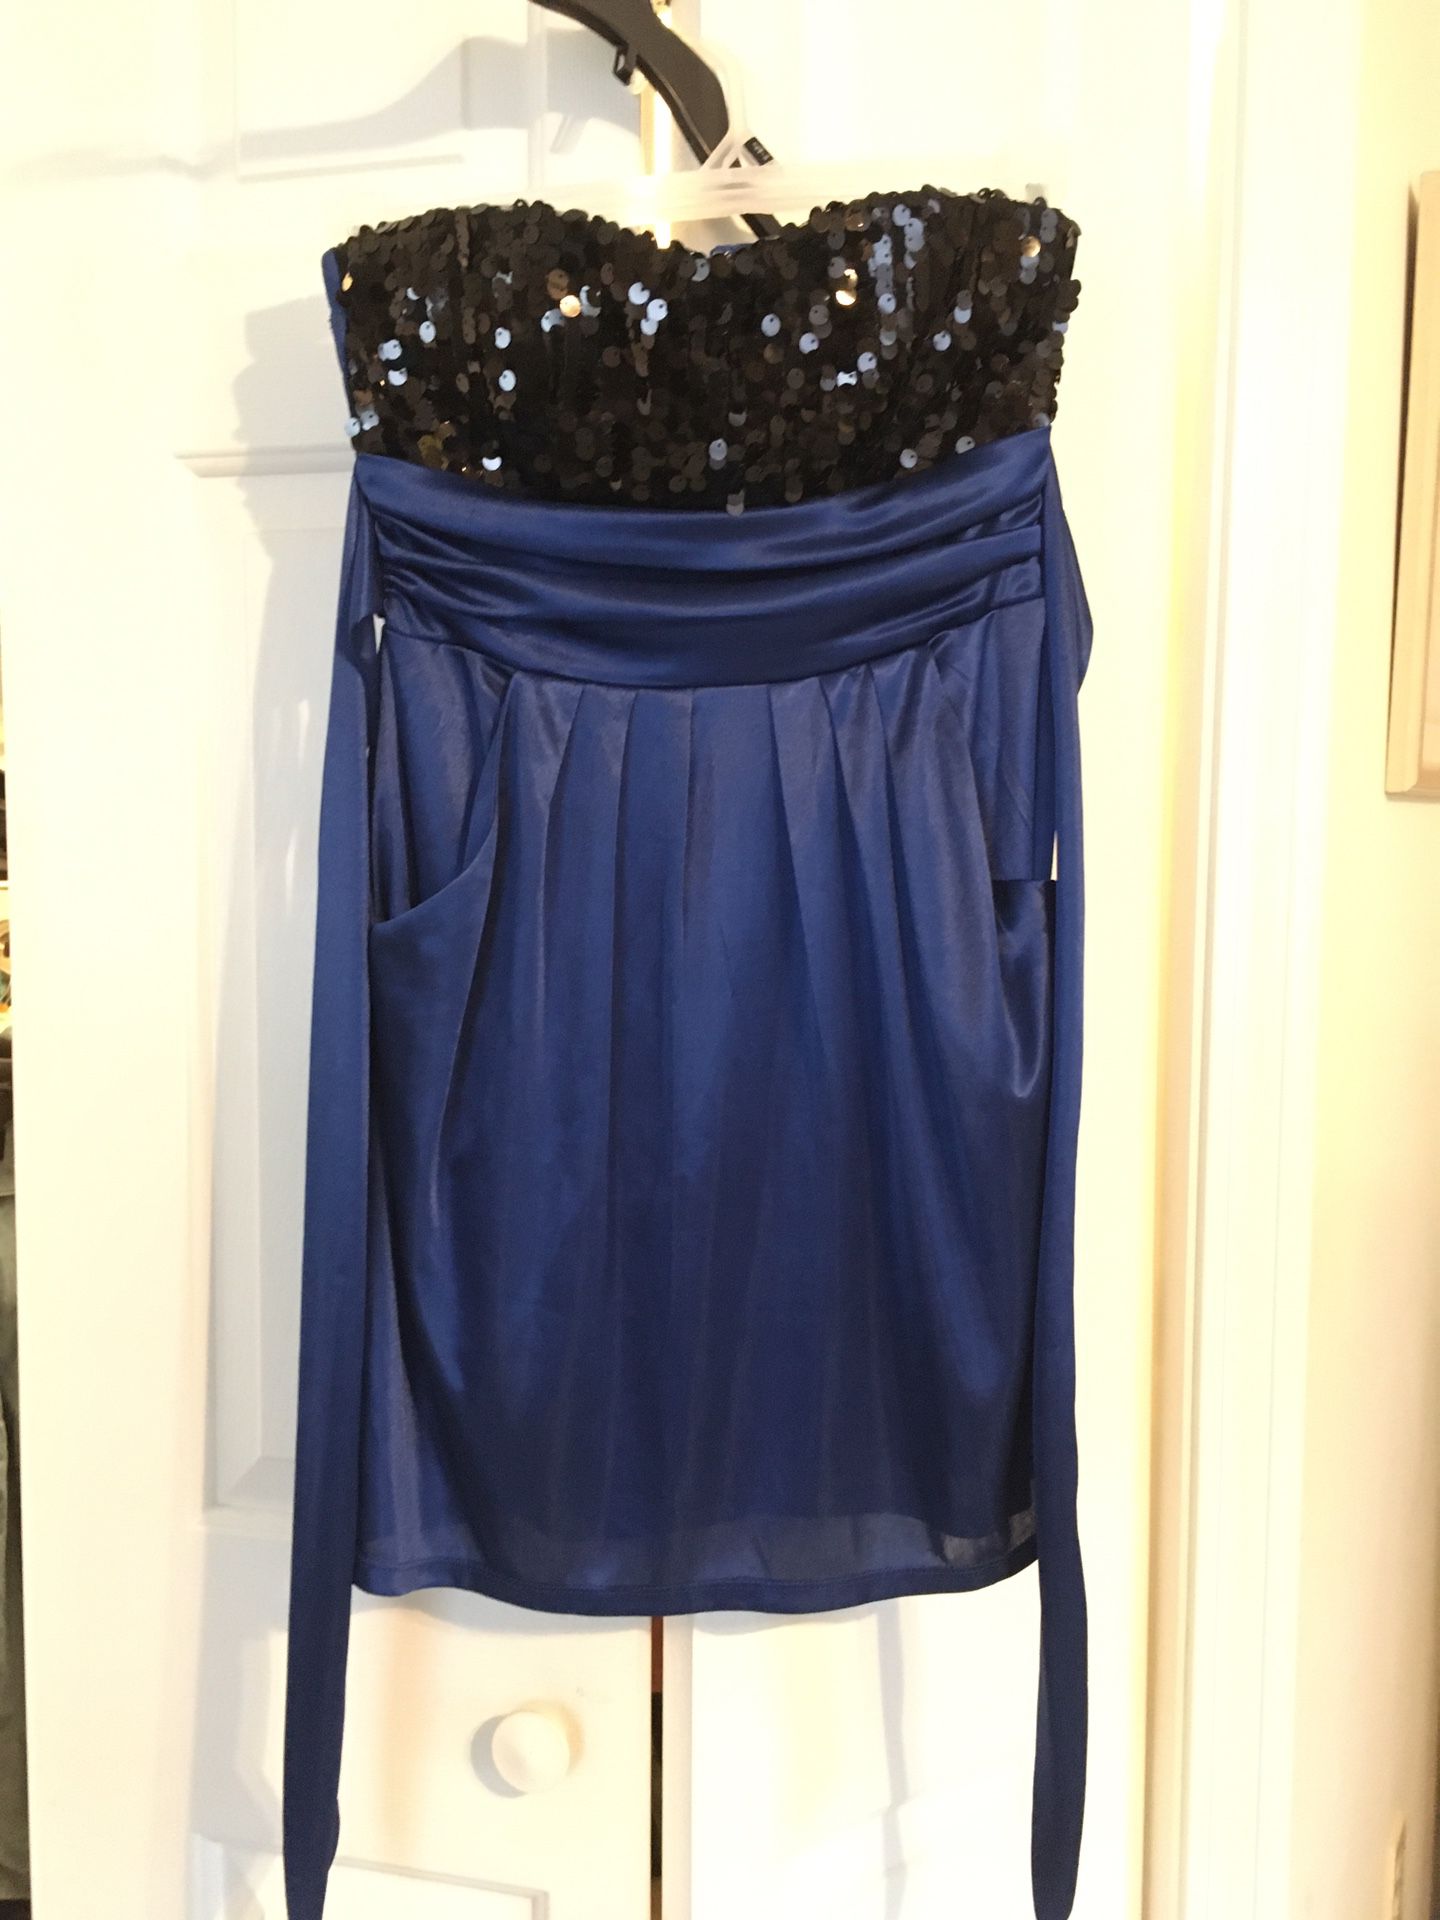 Small, black and blue strapless dress